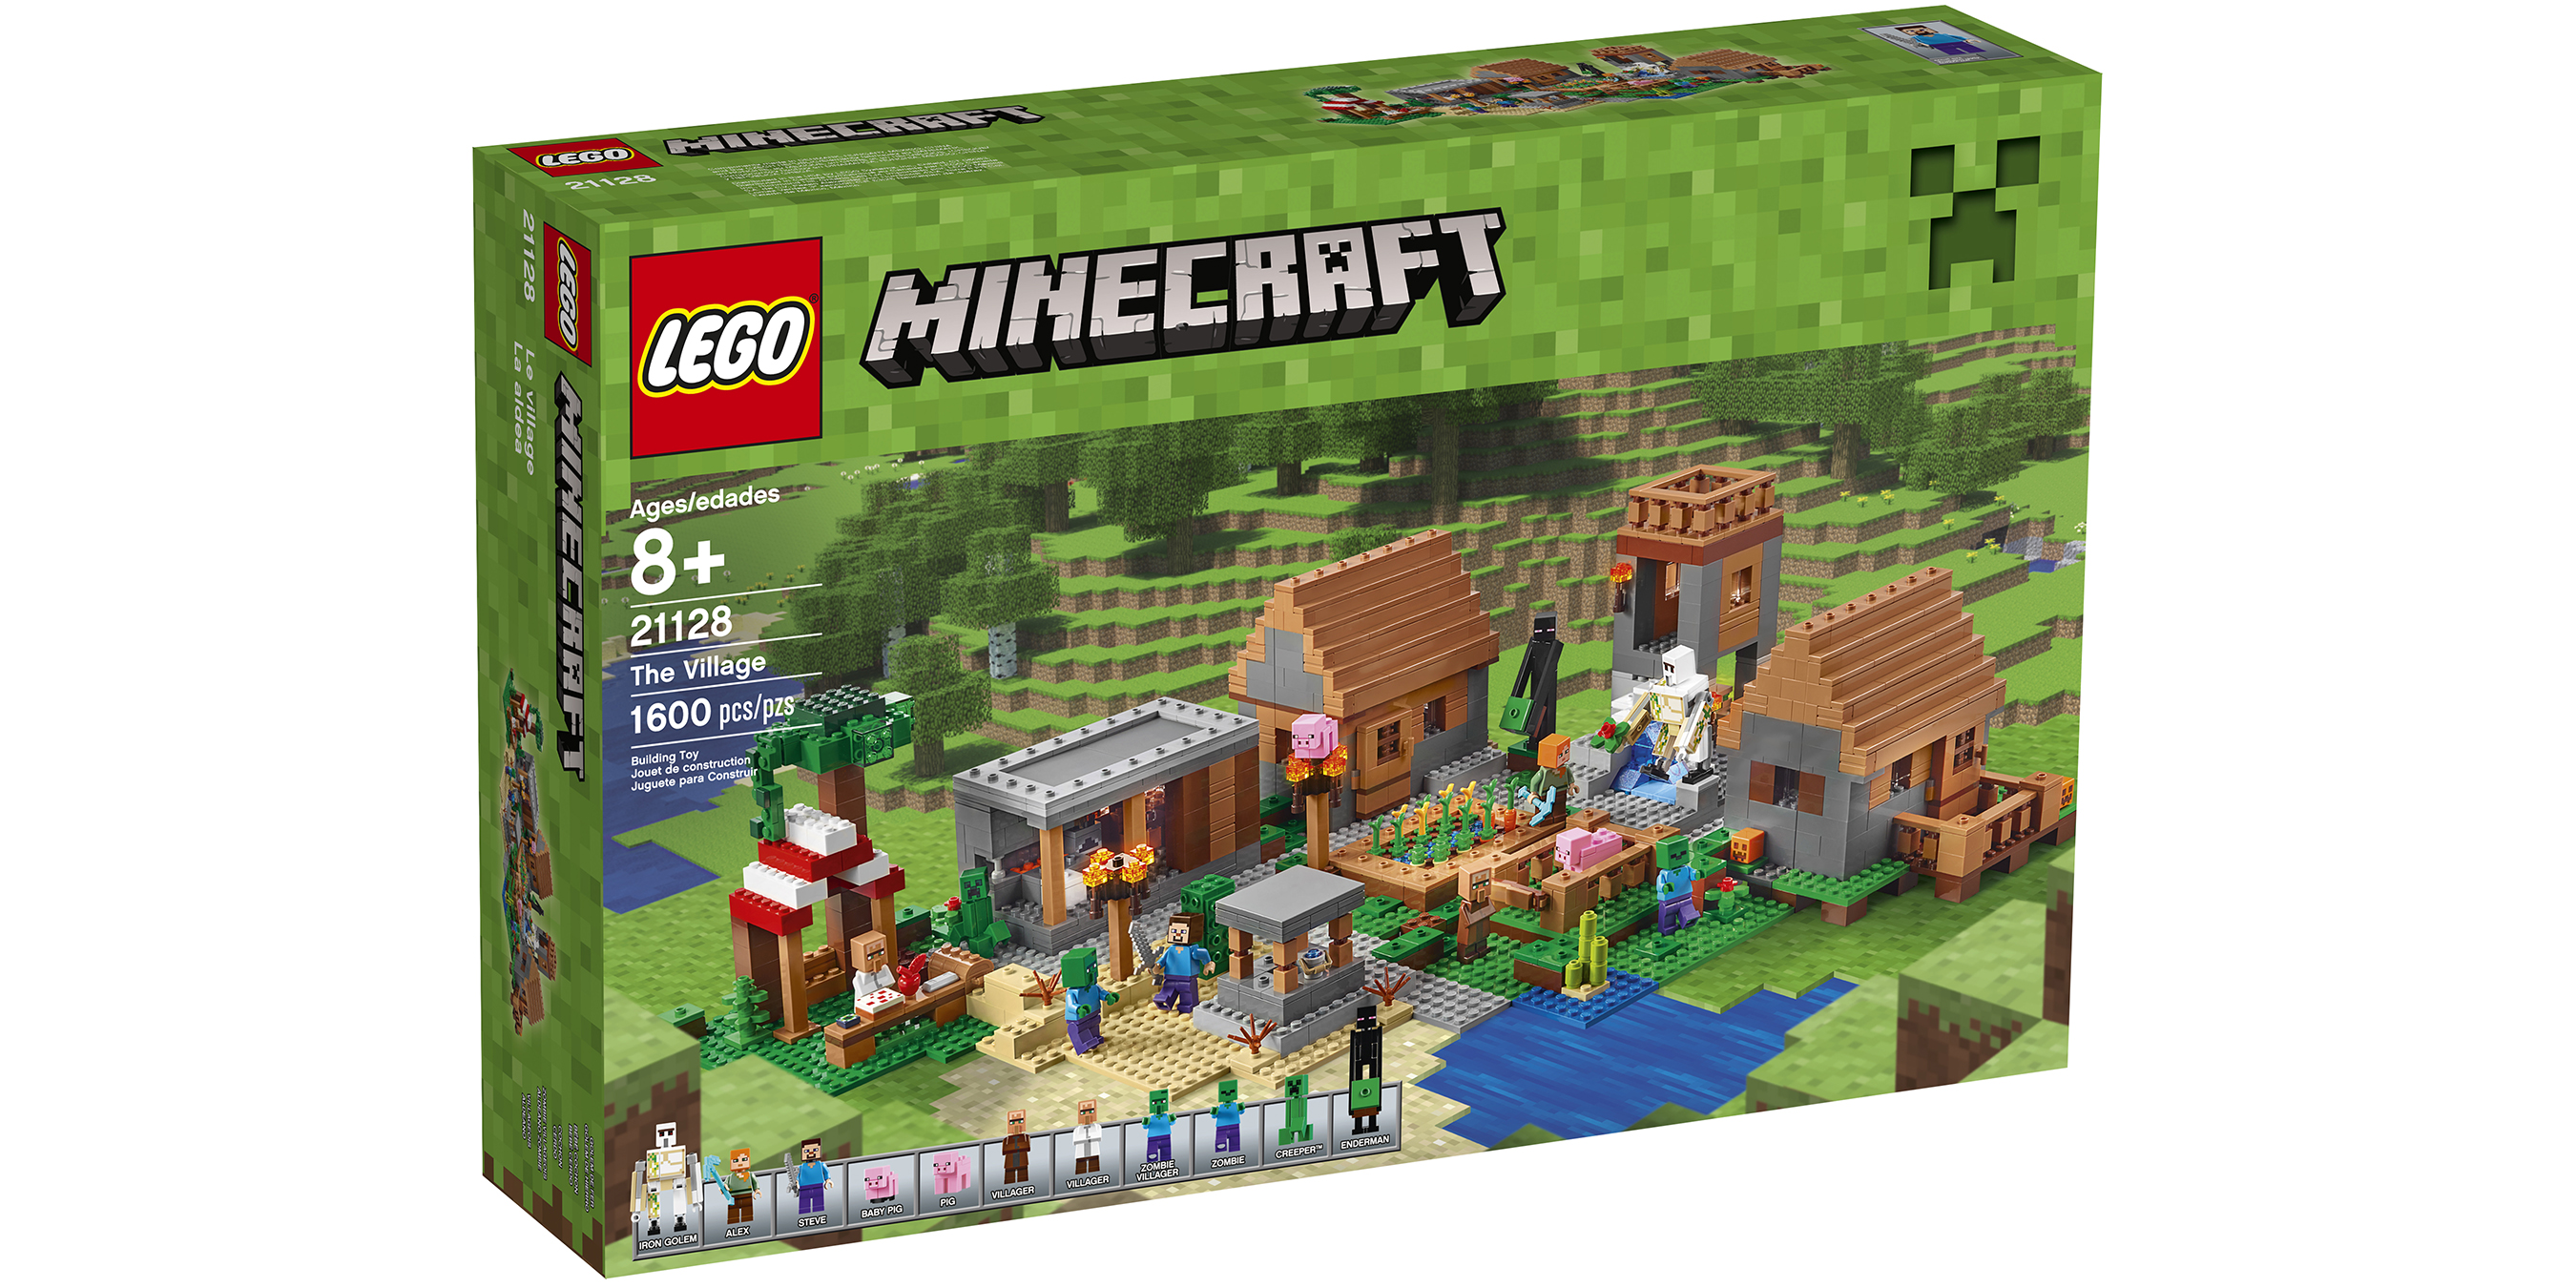 LEGO reveals a massive 1,600 piece Minecraft set loaded with zombies,  endermen and more